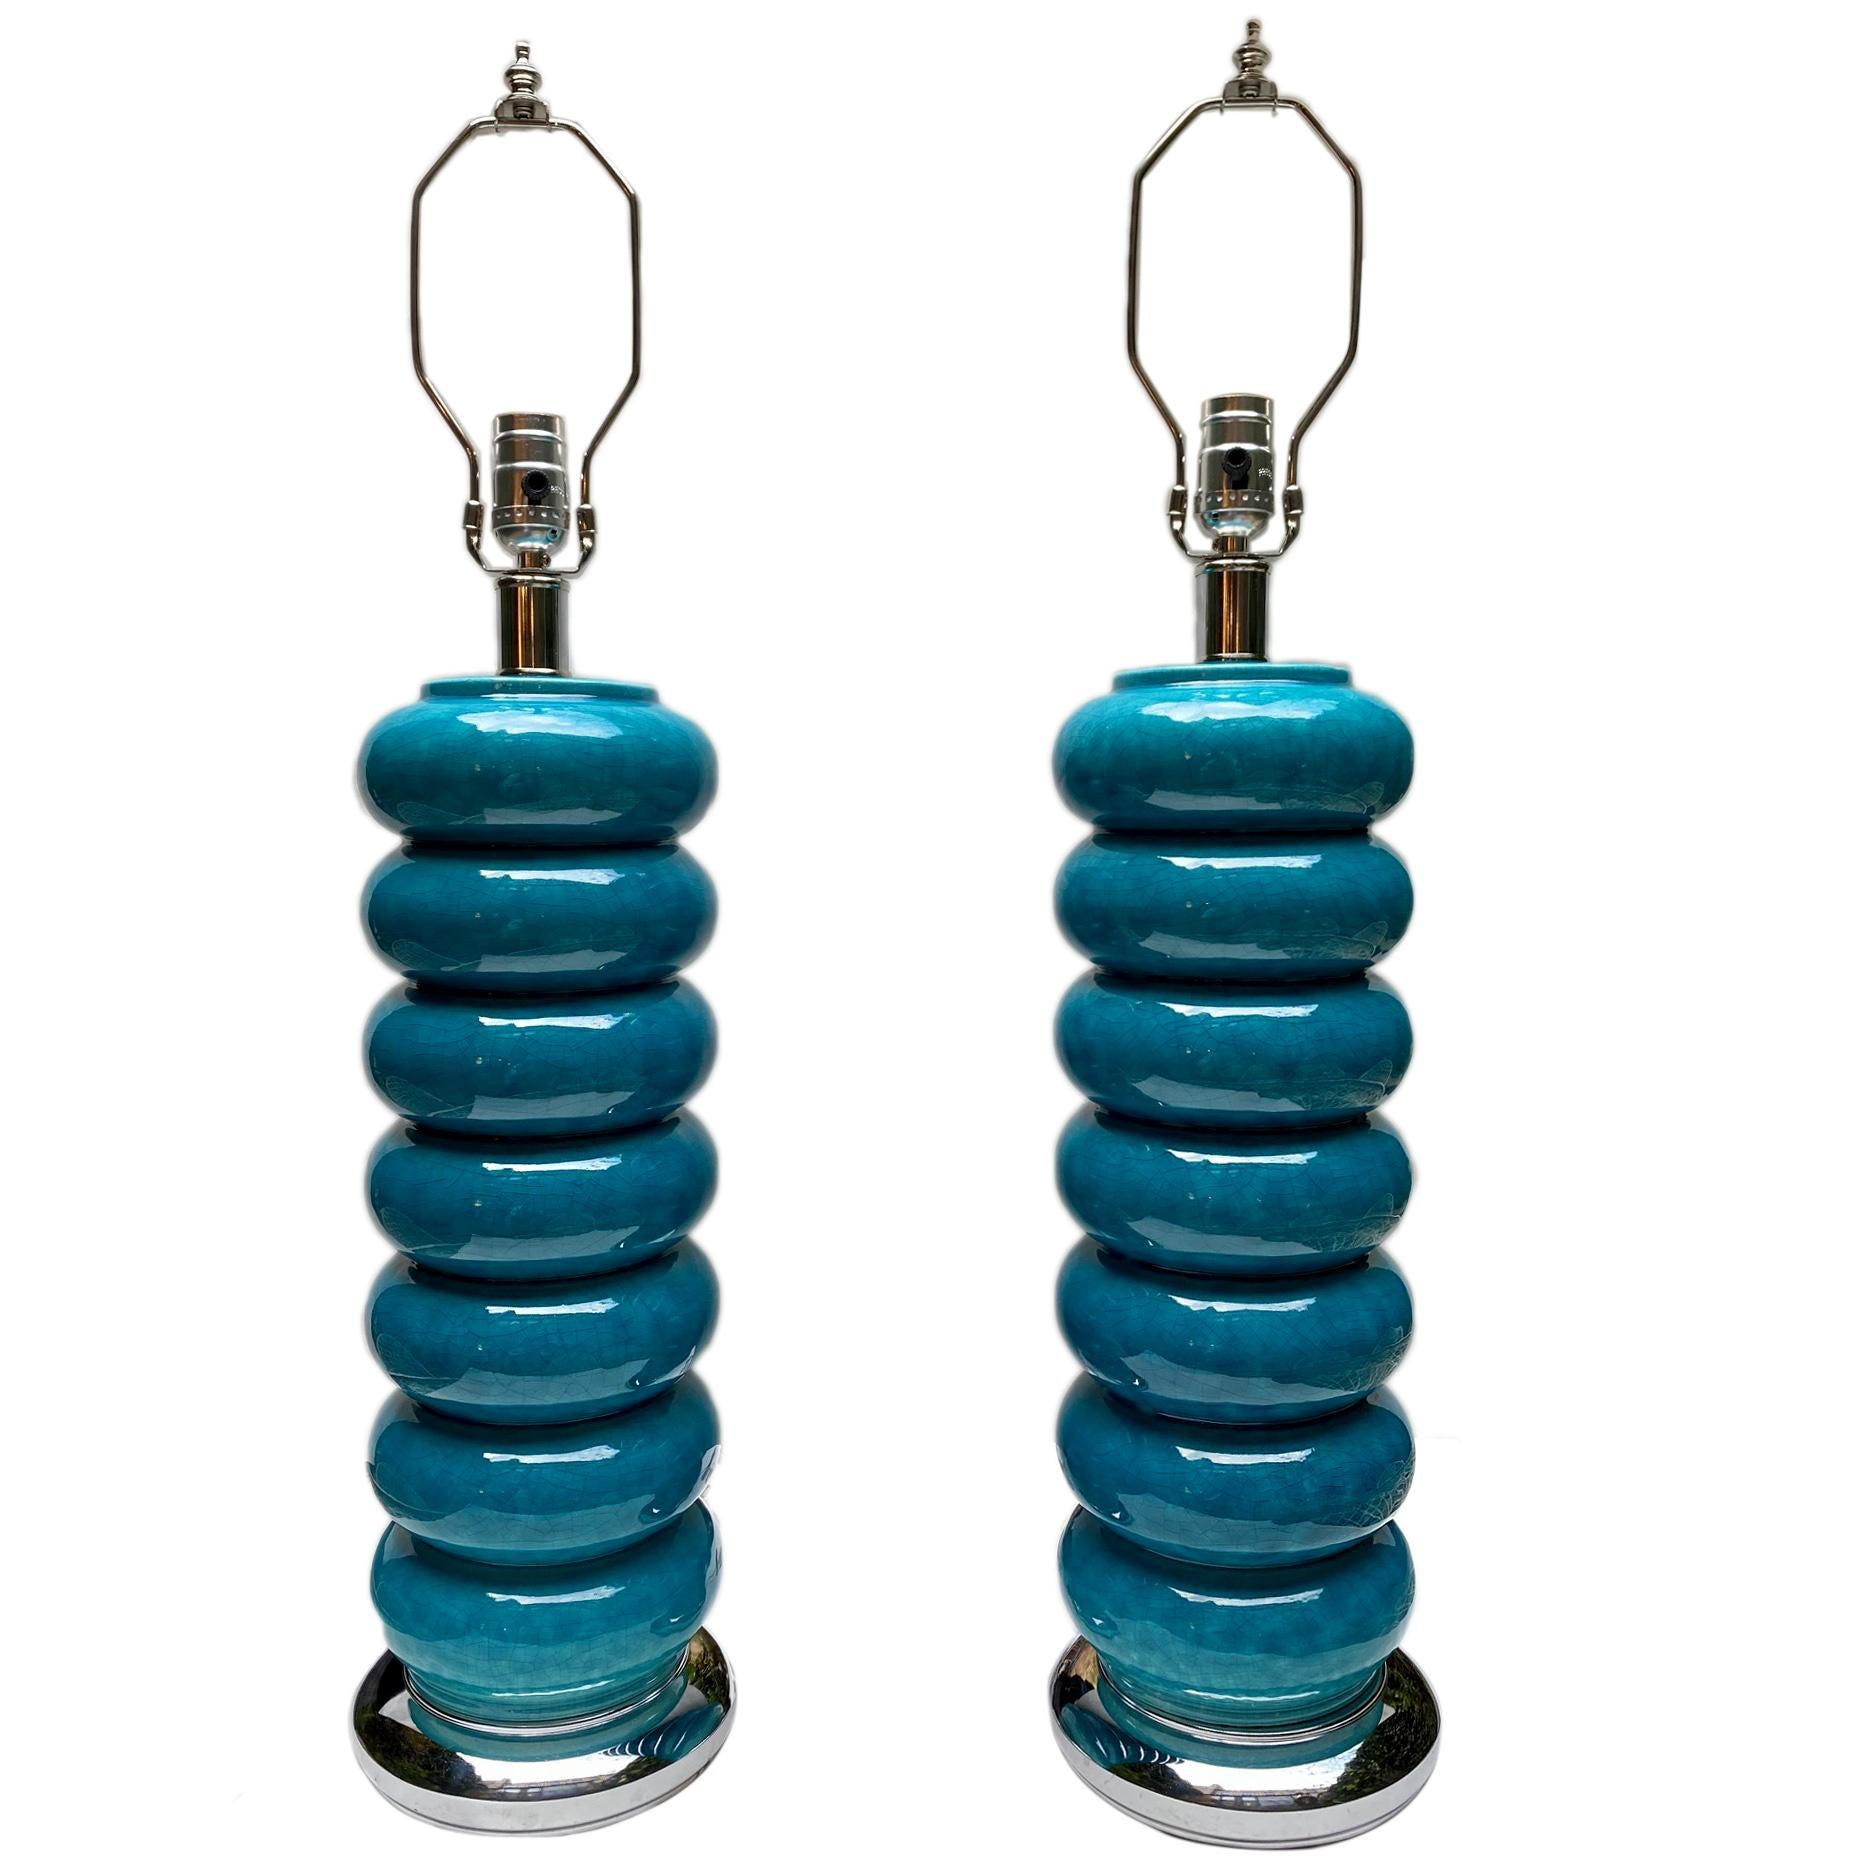 Pair of circa 1960's turquoise porcelain table lamps with nickel plated bases.

Measurements:
Height of body:  19.5